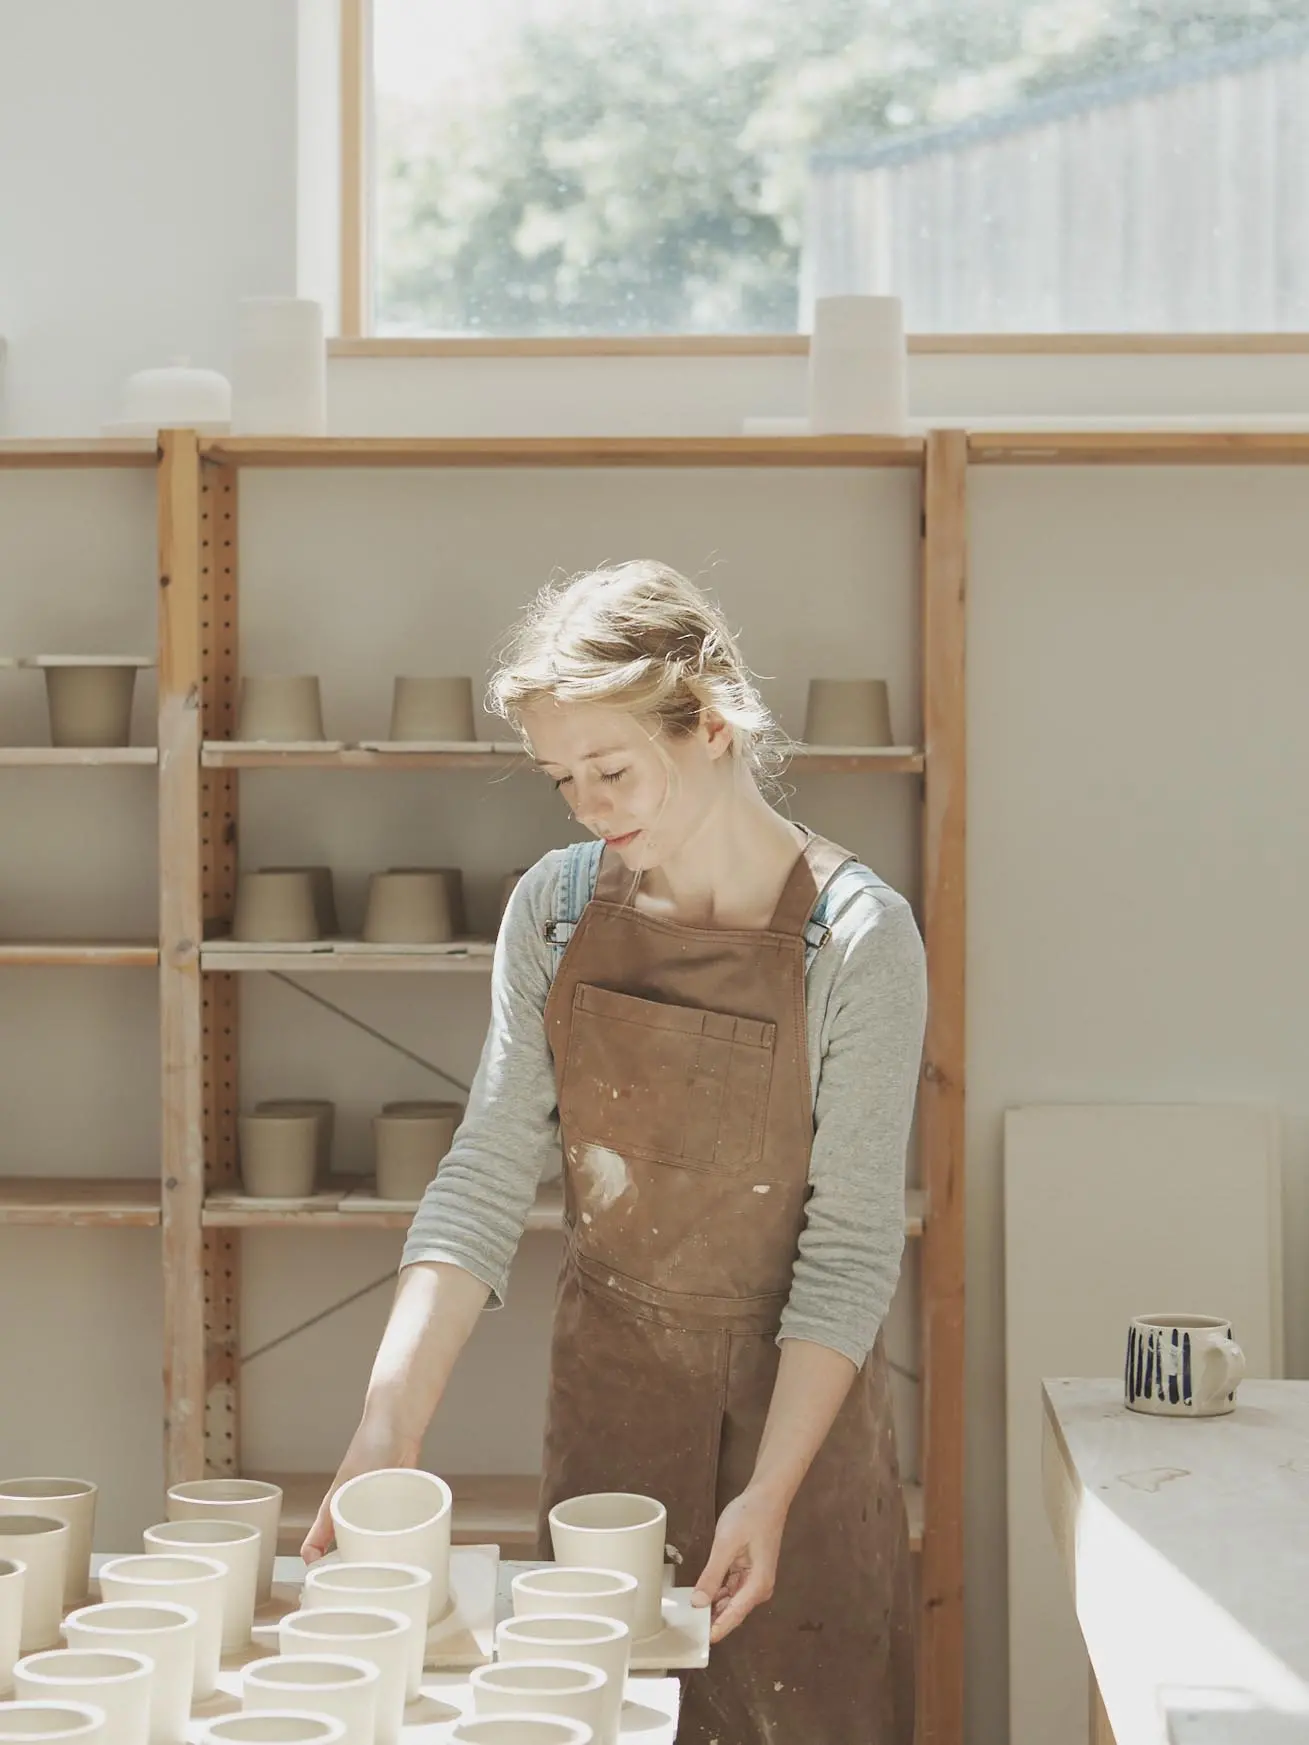 A female potter picking up freshly thrown ceramics from a worktable in her studio